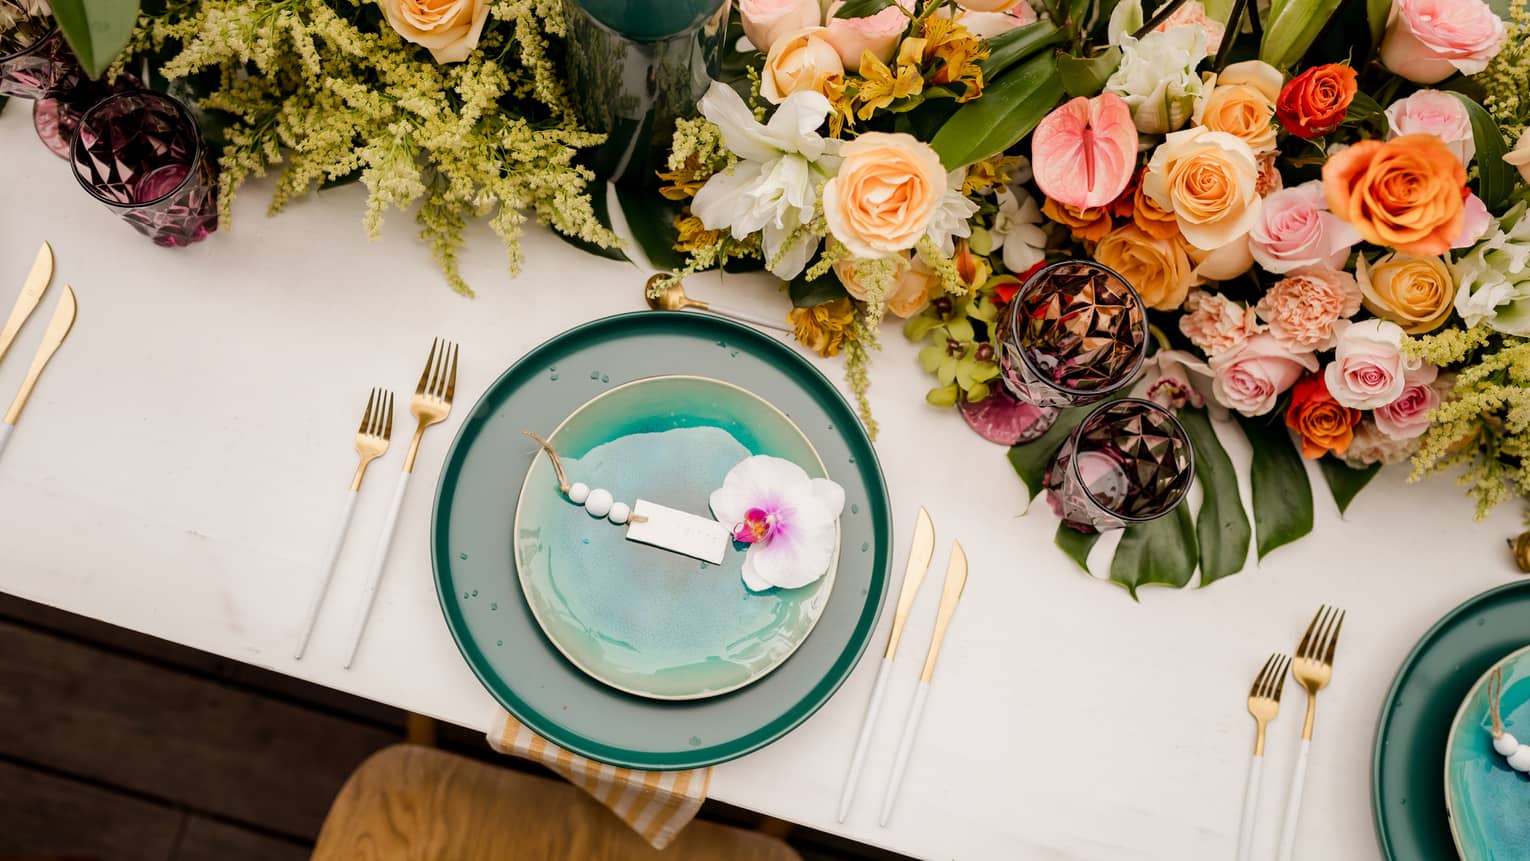 Two teal plates are topped with a white-and-pink flower, with gold cutlery on either side with a large centerpiece featuring various pink and peach flowers along with greenery all set on a white tablecloth